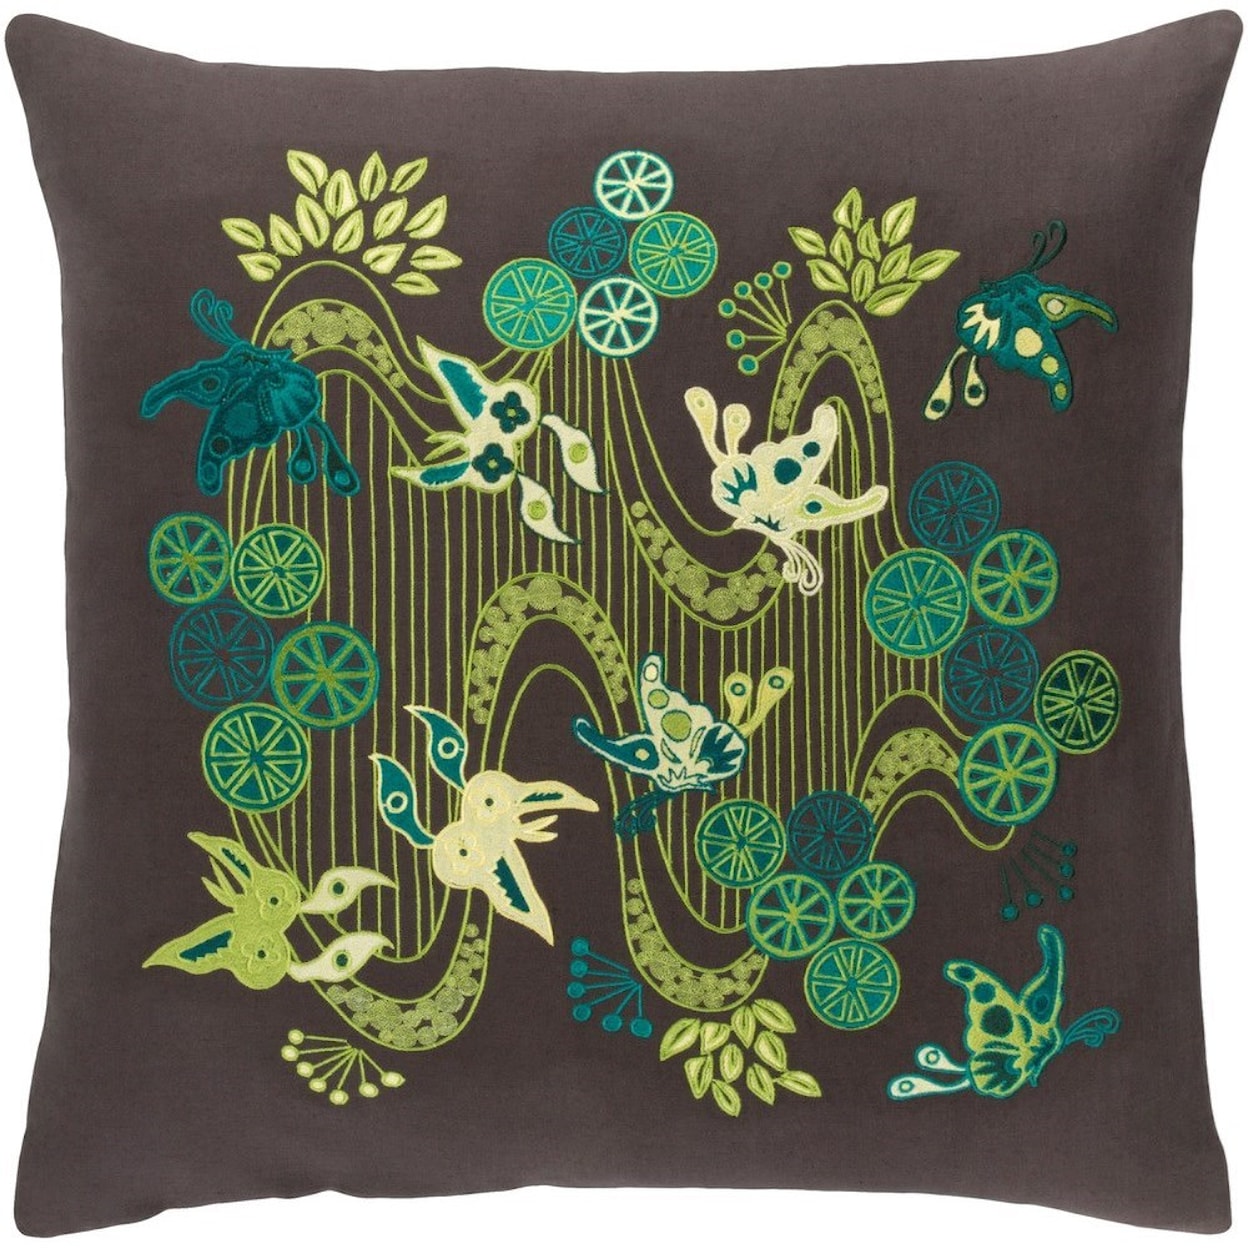 Surya Chinese River 22 x 22 x 5 Polyester Throw Pillow